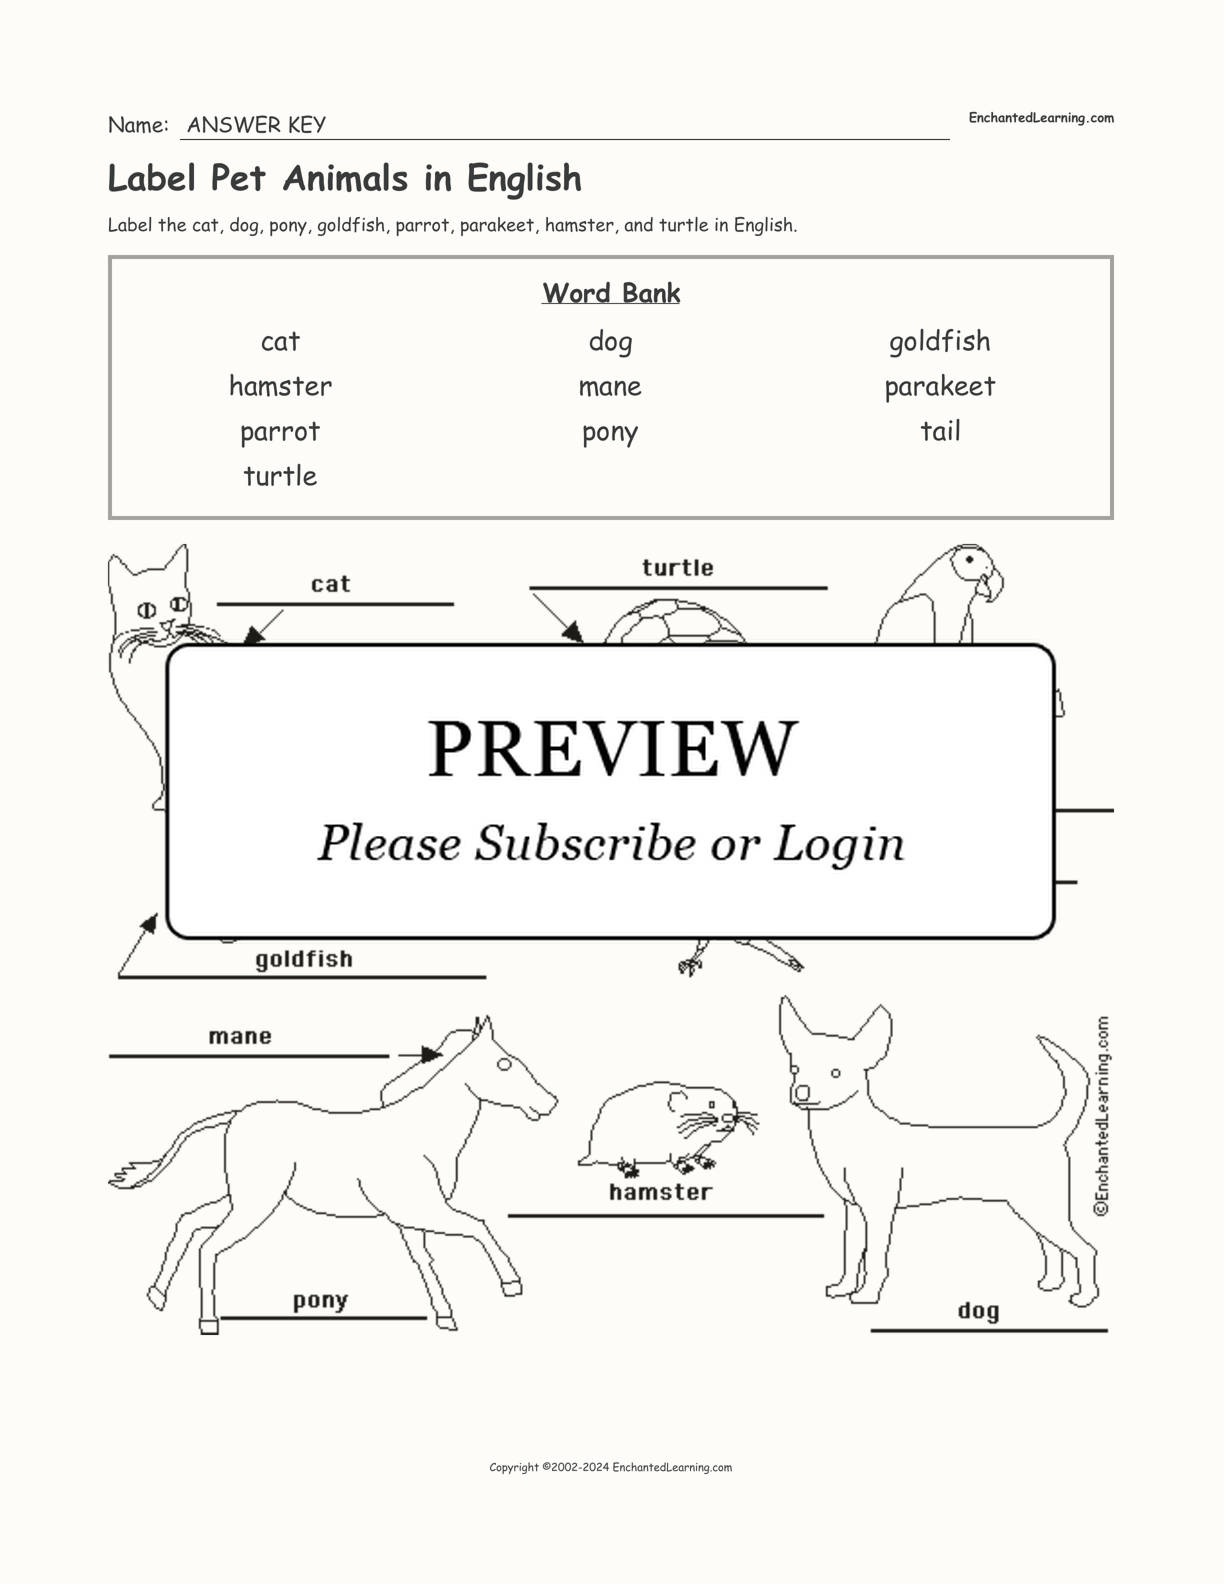 Label Pet Animals in English interactive worksheet page 2